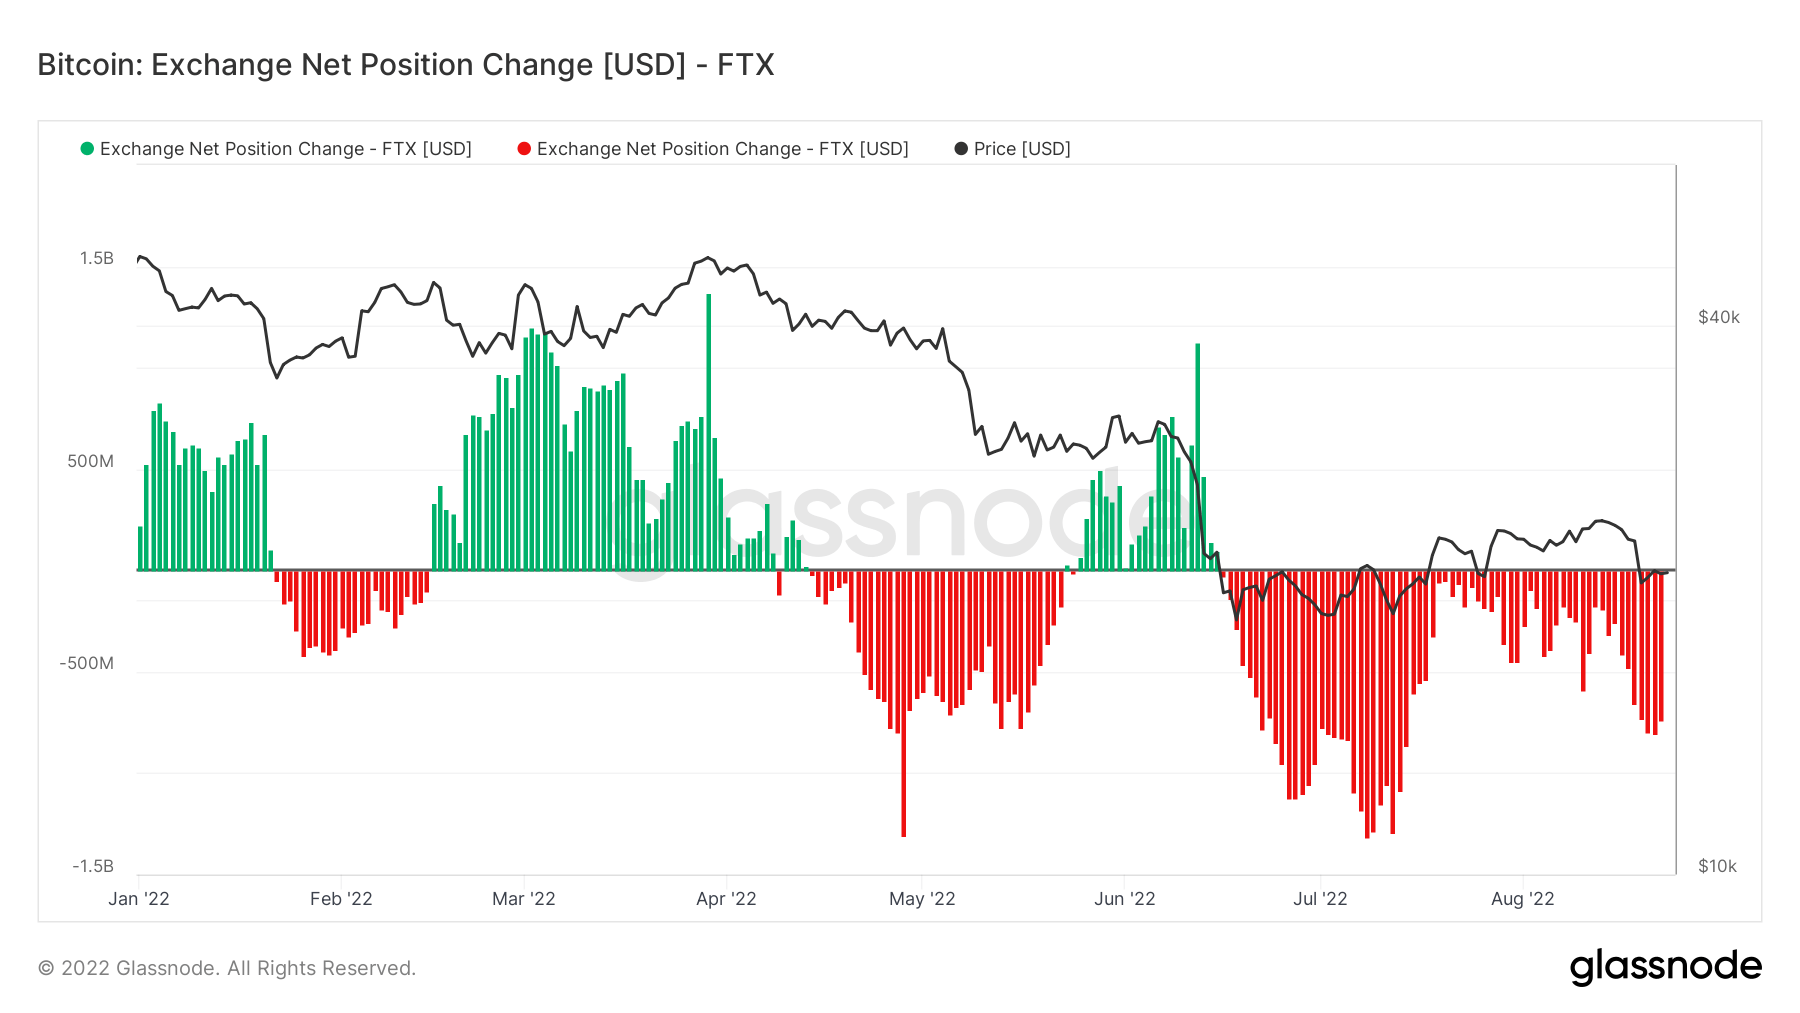 Bitcoin Net Position Change - FTX only